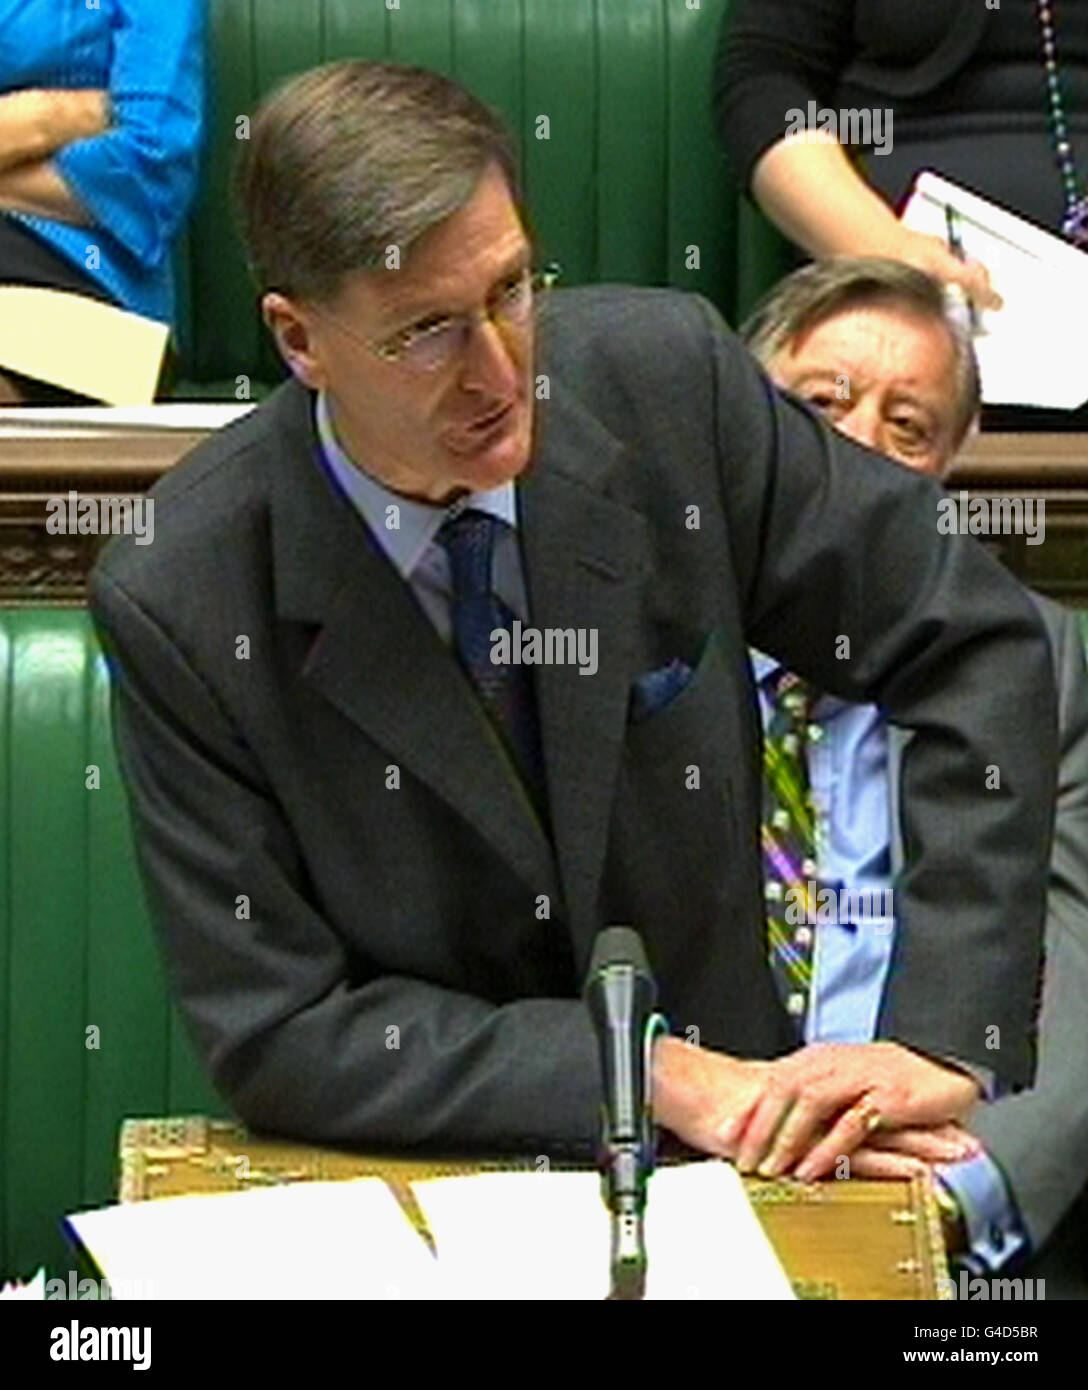 Attorney General Dominic Grieve QC speaks in the House of Commons, London, where a debate is taking place on the recent phone hacking allegations. Stock Photo